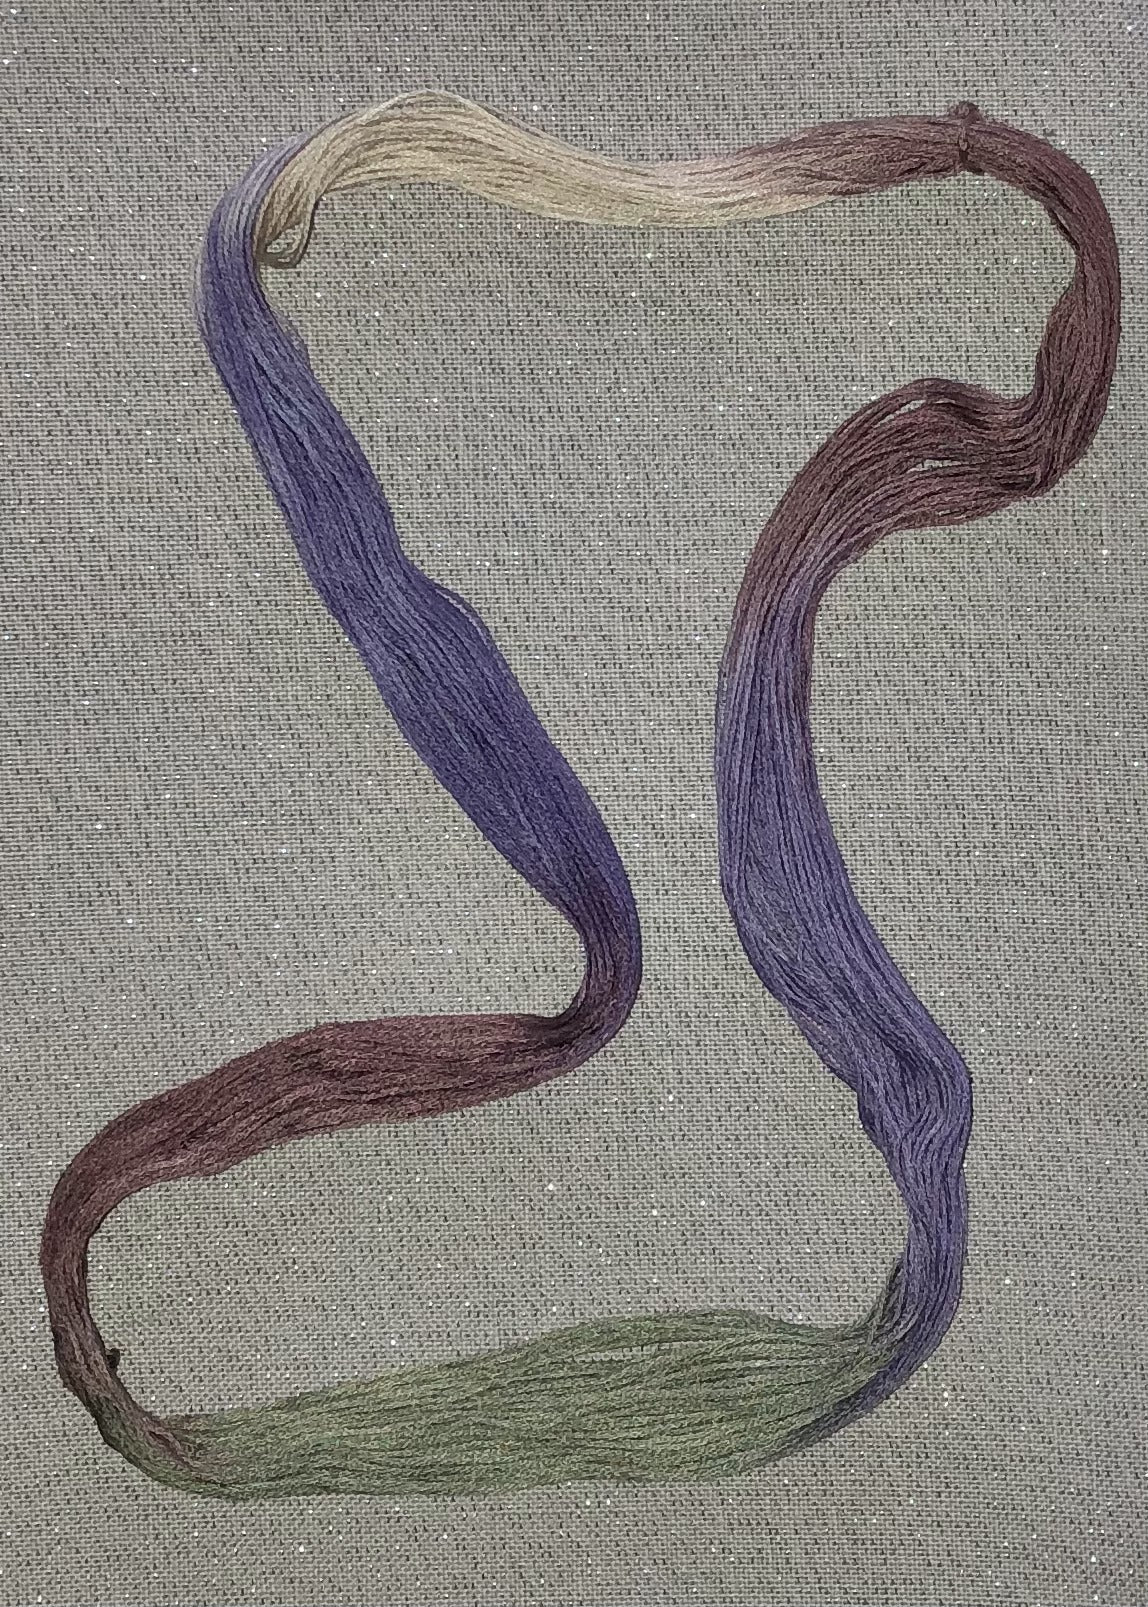 Silk hand dyed floss - Woodland Sprite - Dyeing for Cross Stitch